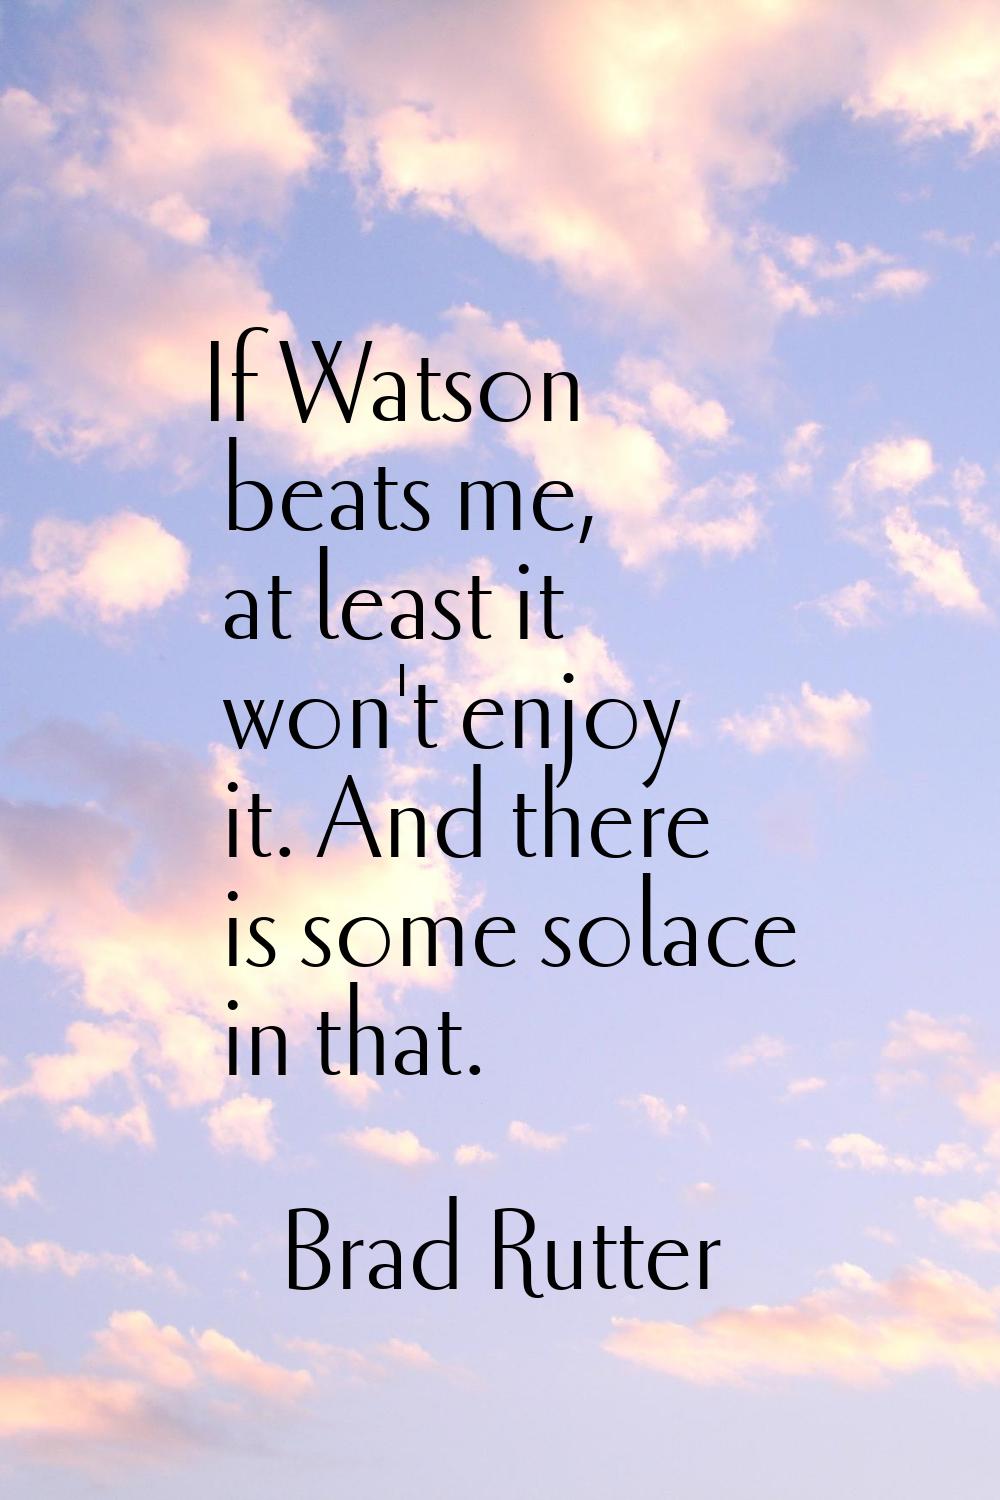 If Watson beats me, at least it won't enjoy it. And there is some solace in that.